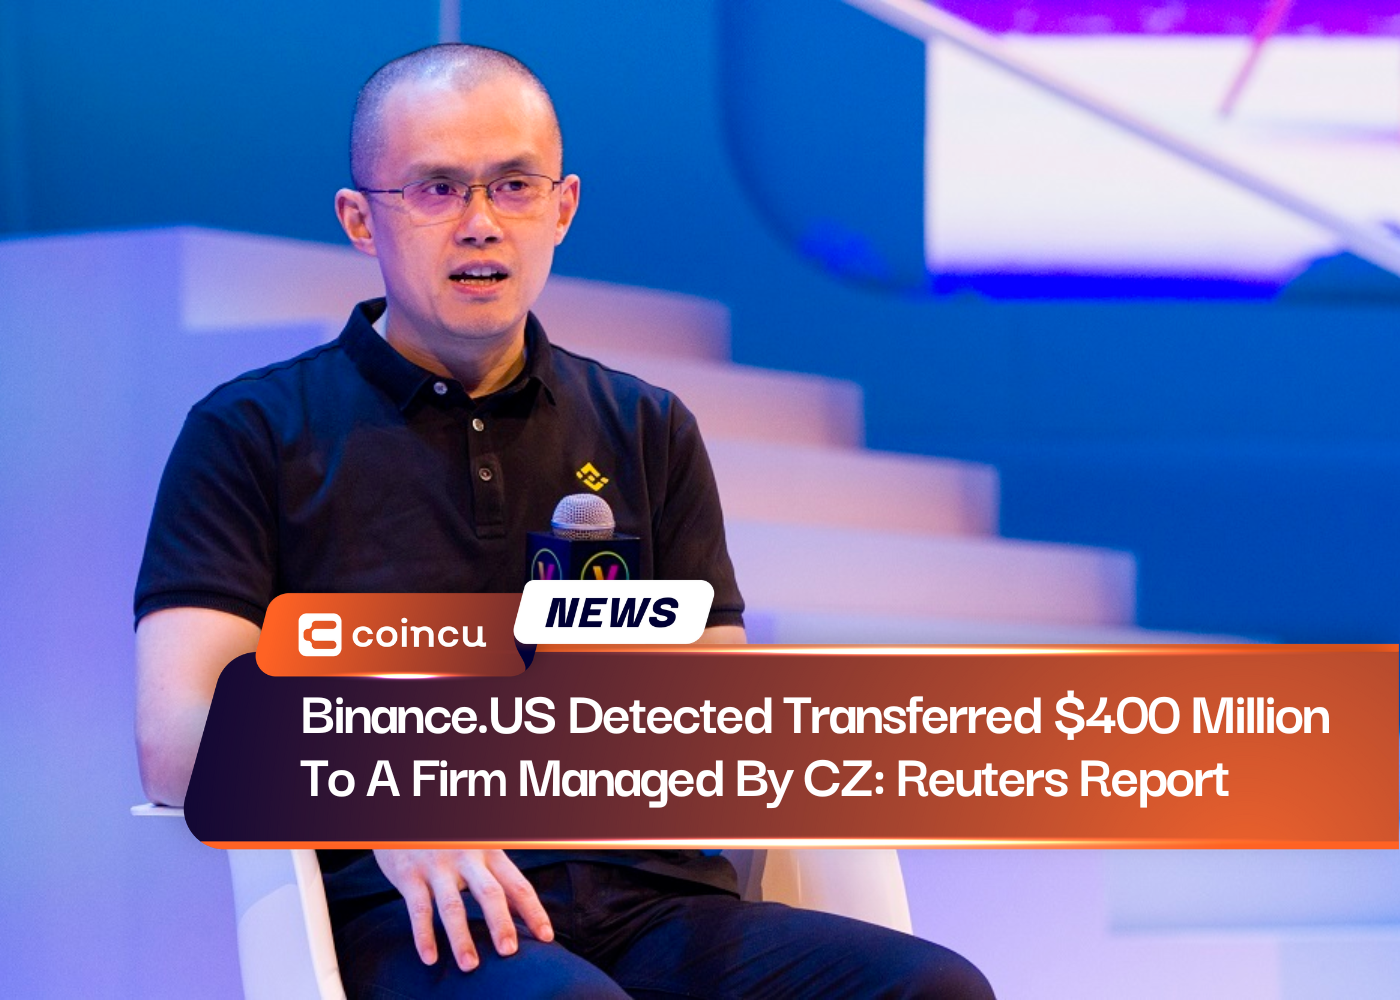 Binance.US Detected Transferred $400 Million To A Firm Managed By CZ: Reuters Report